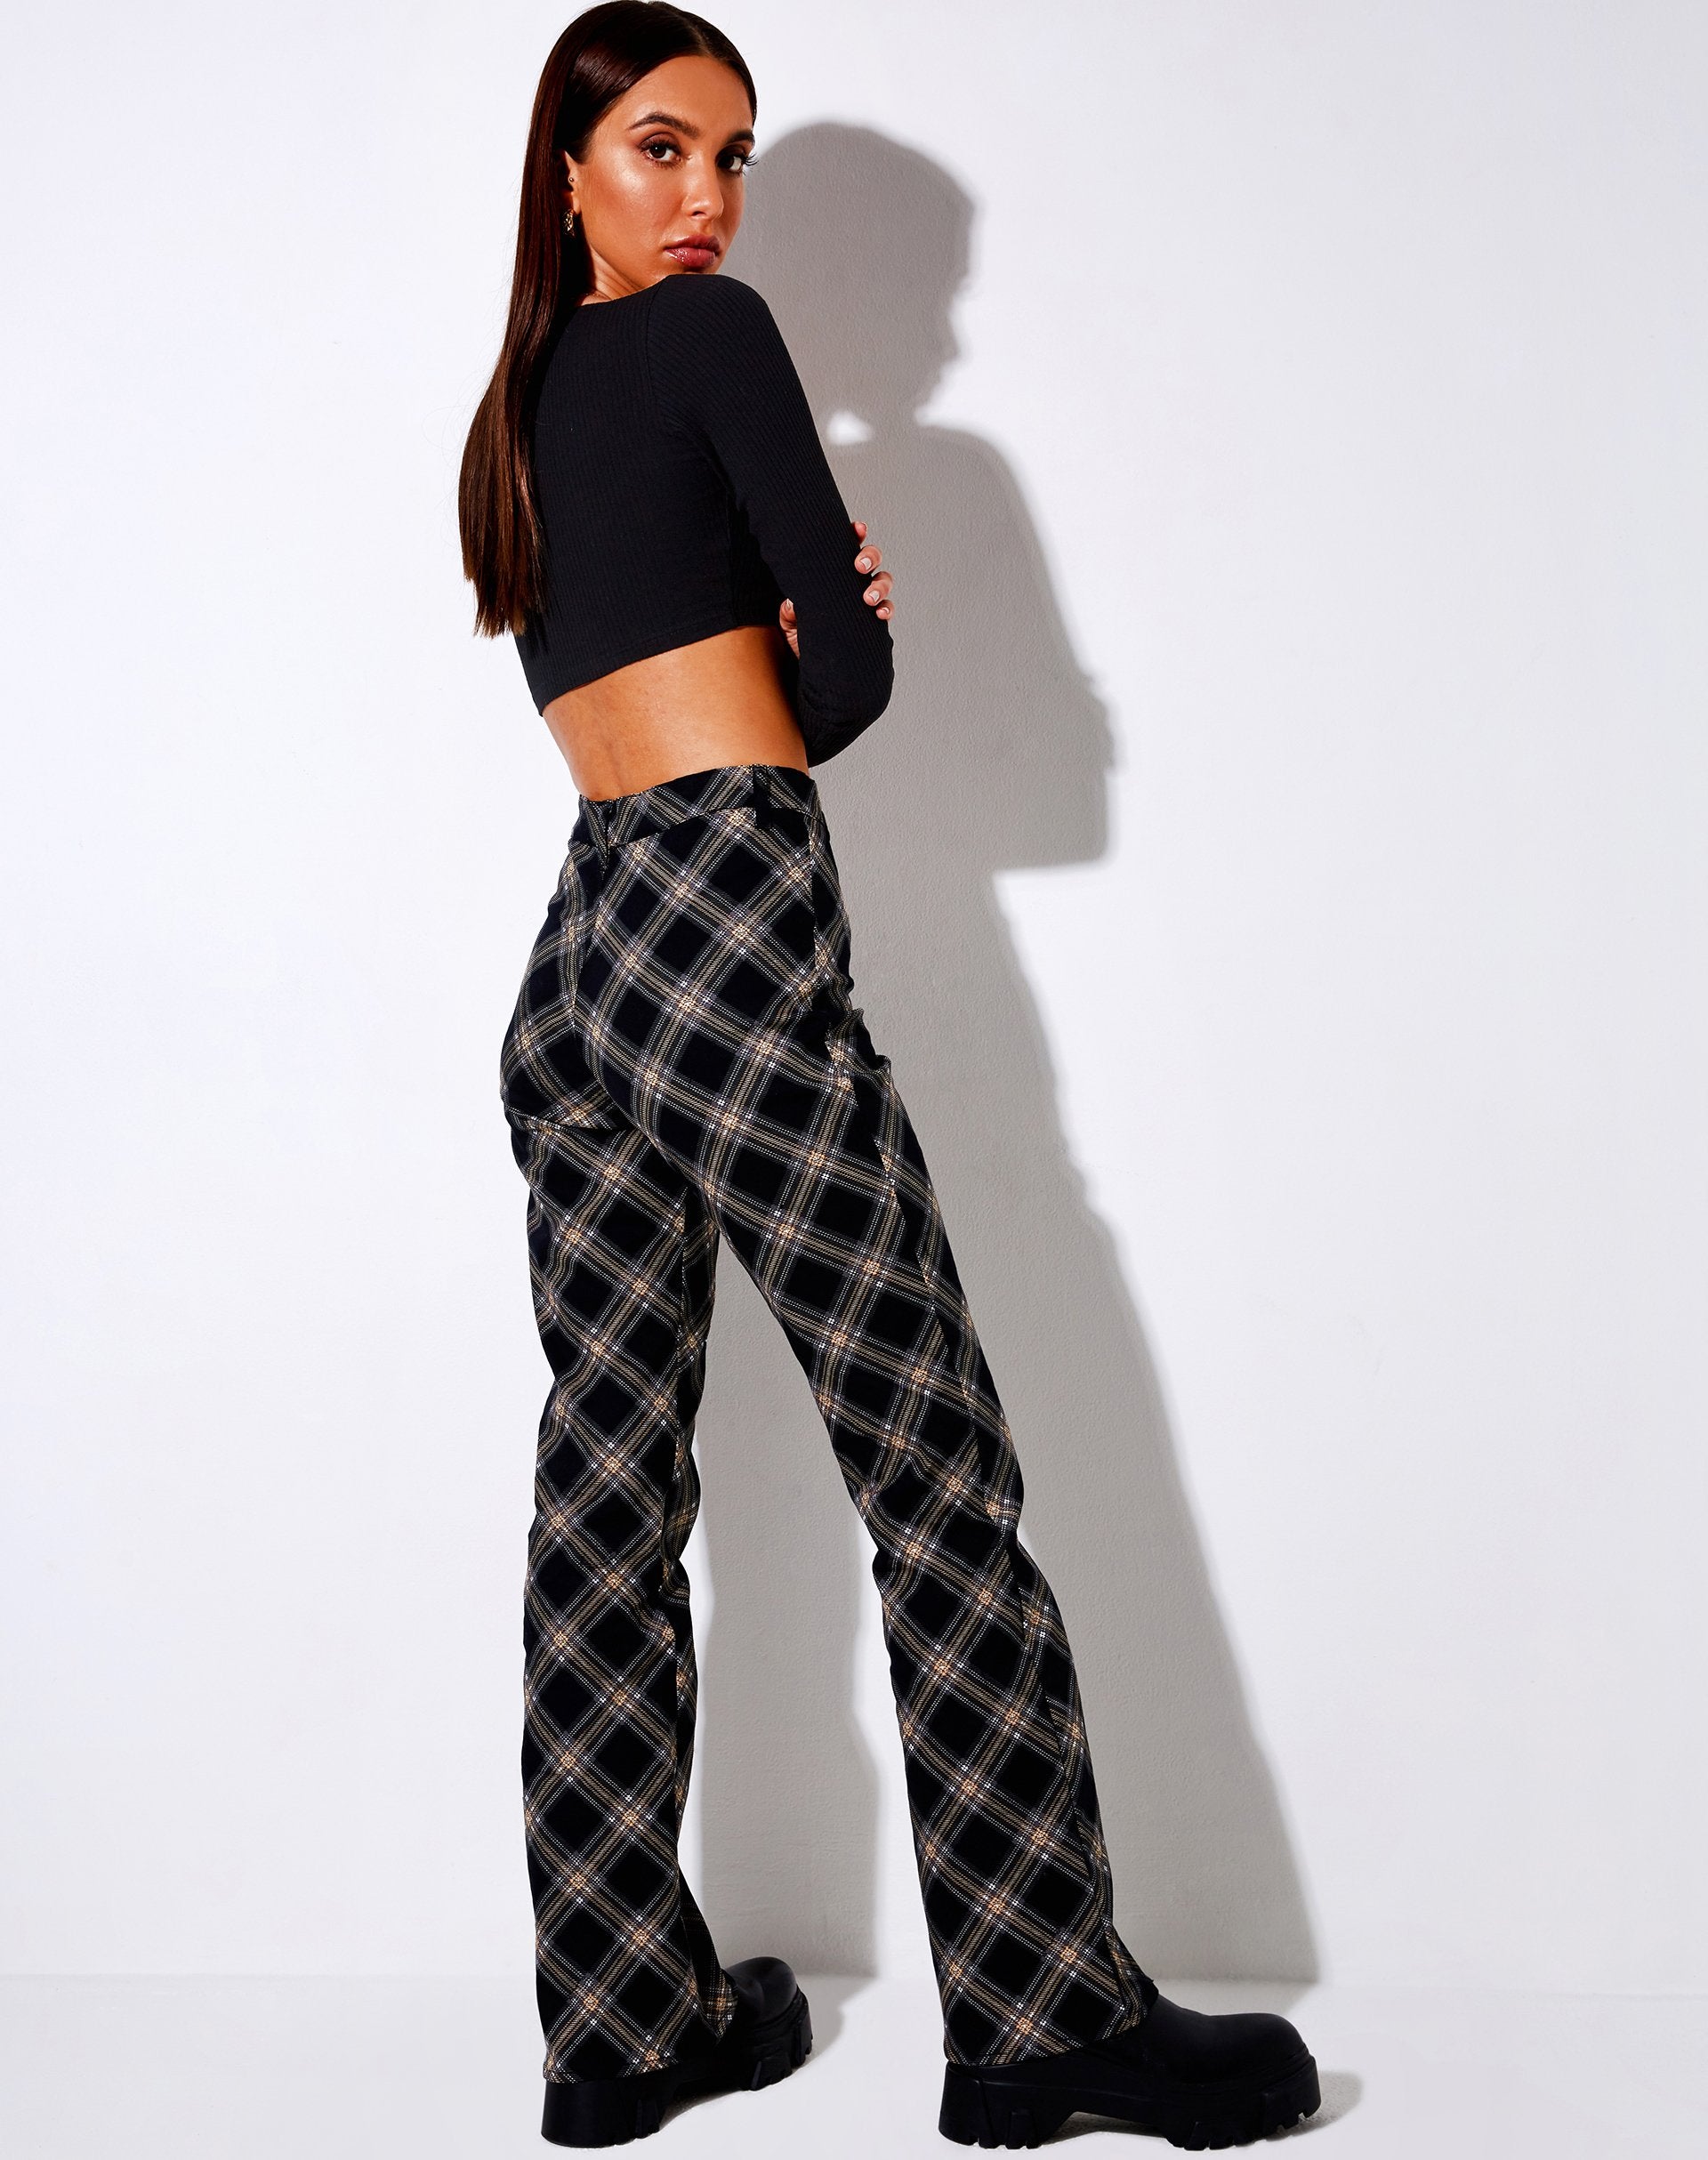 Image of Zoven Flare Trouser in 20s Check Black and Grey